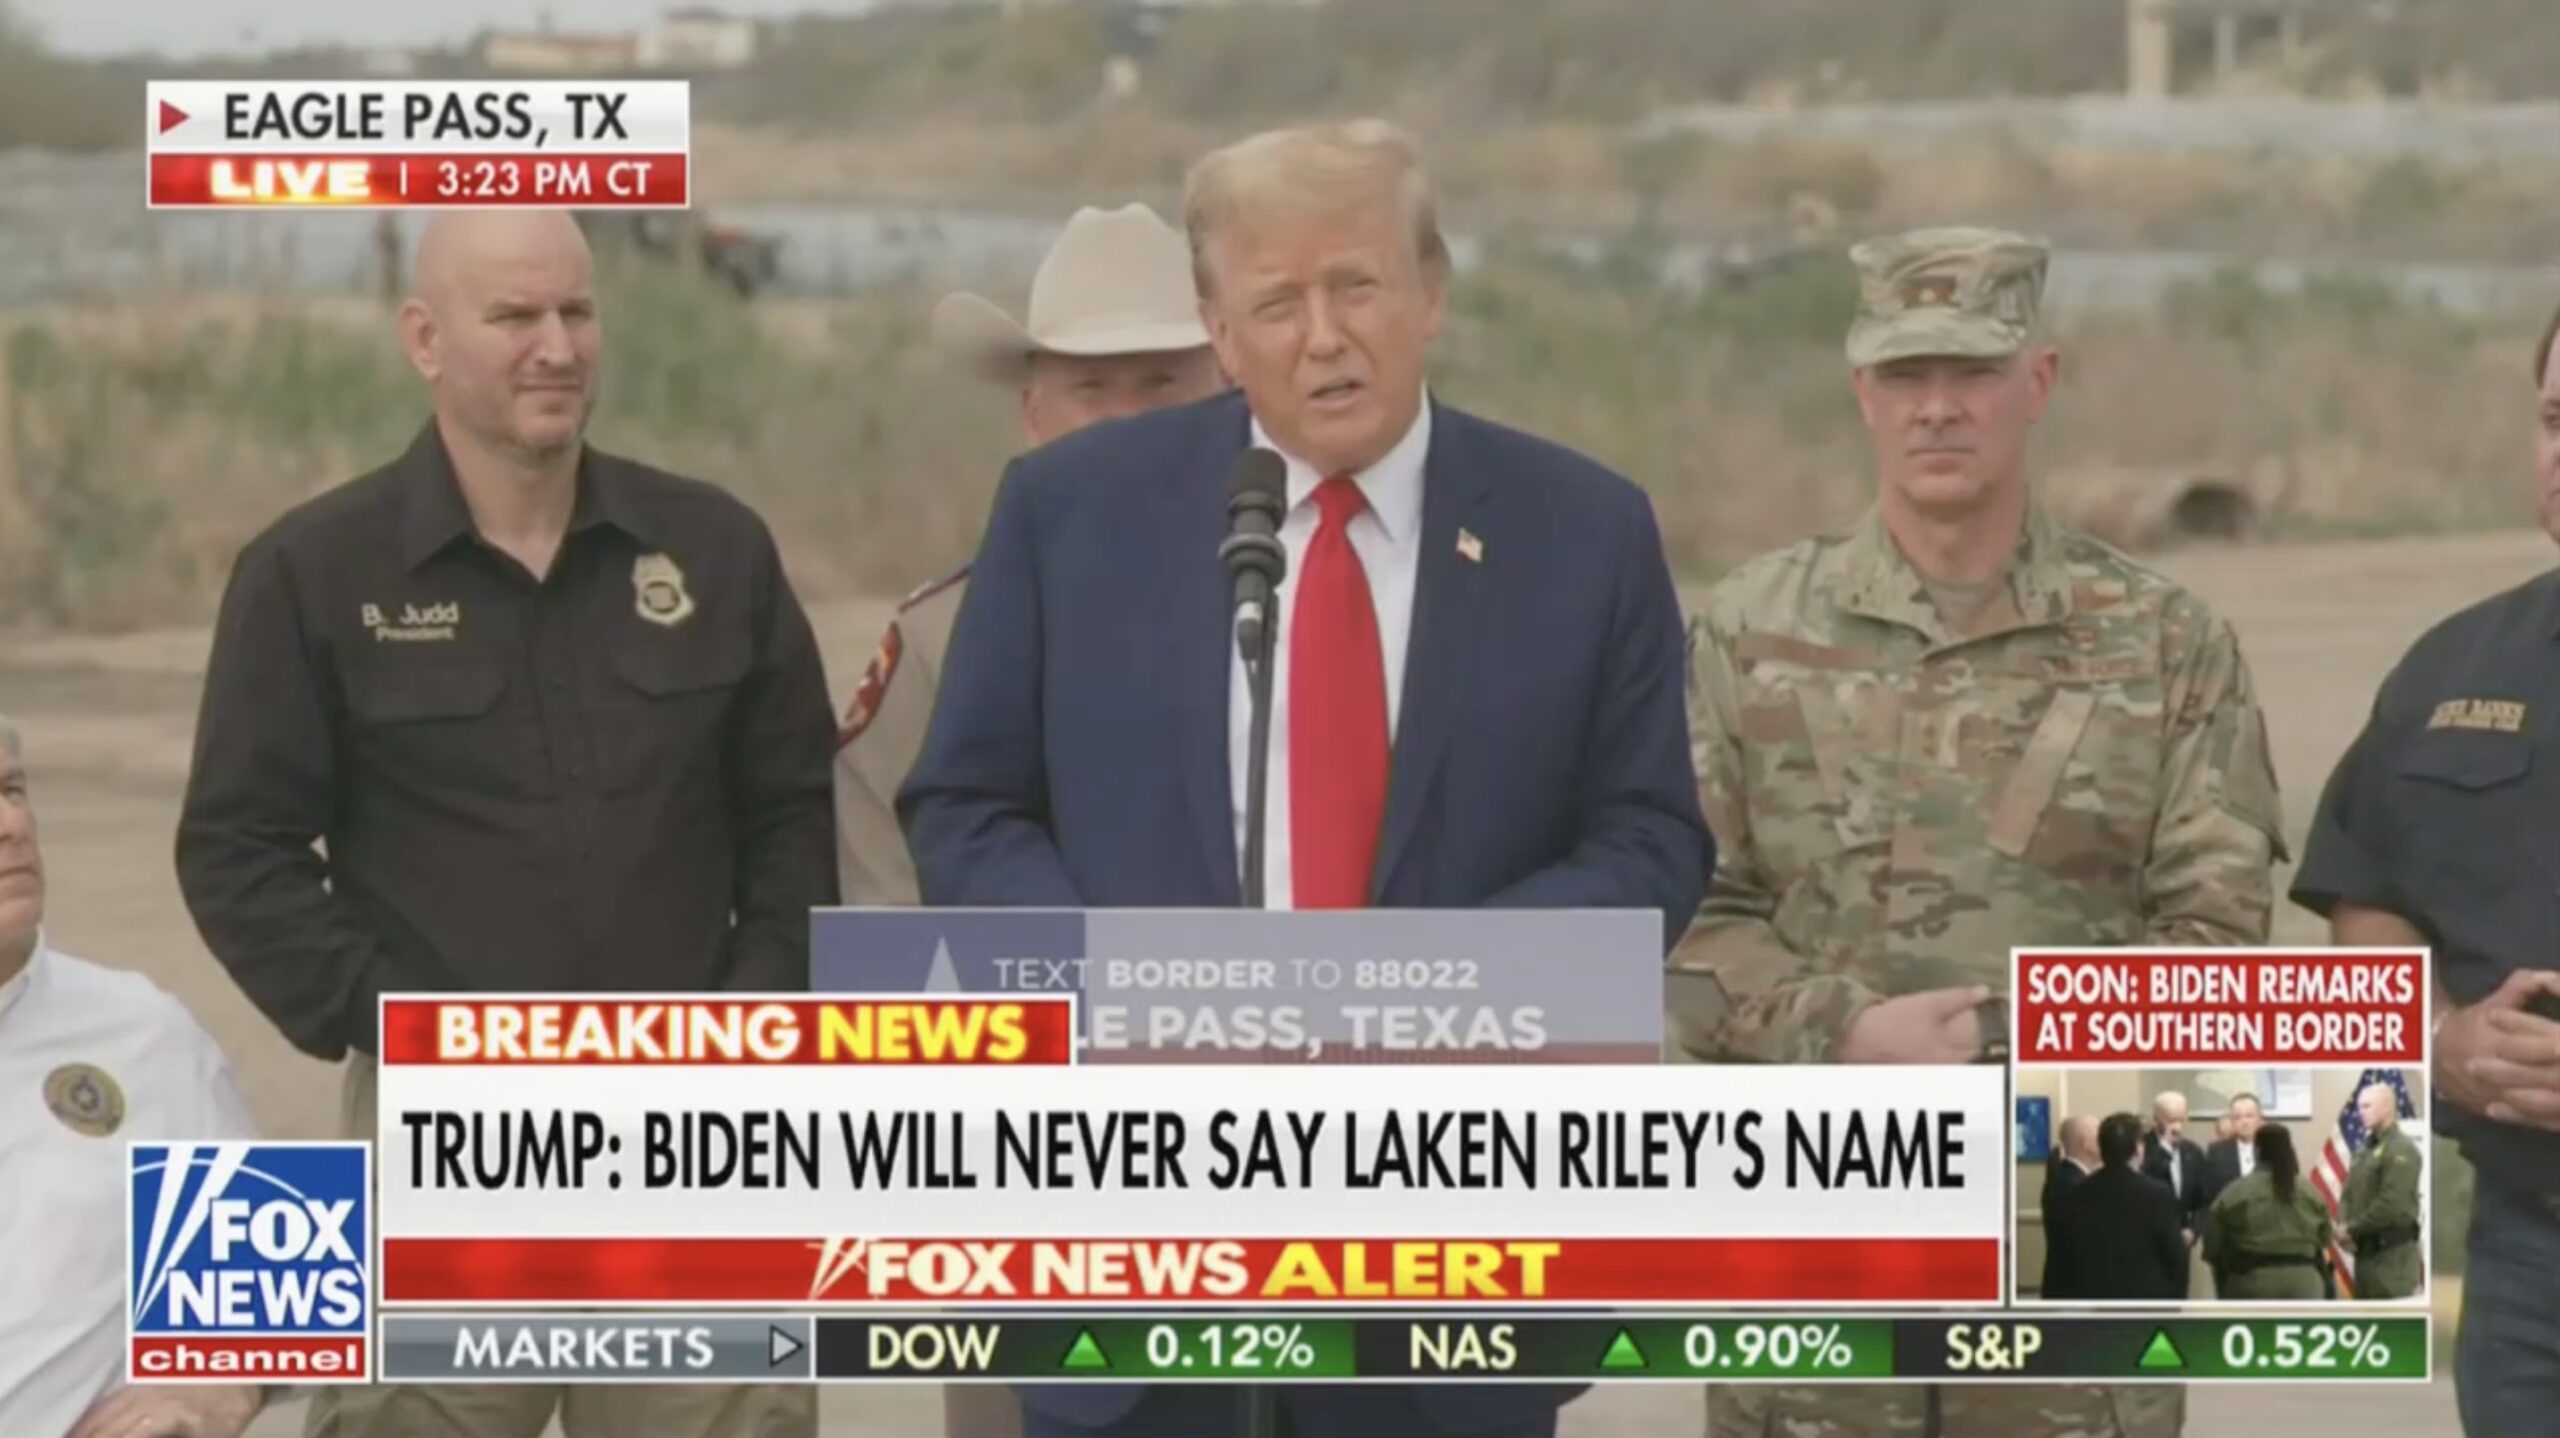 Biden Has The Blood of Countless Innocent Victims on His Hands, Says Trump During Speech on Migrant Murders [Video]